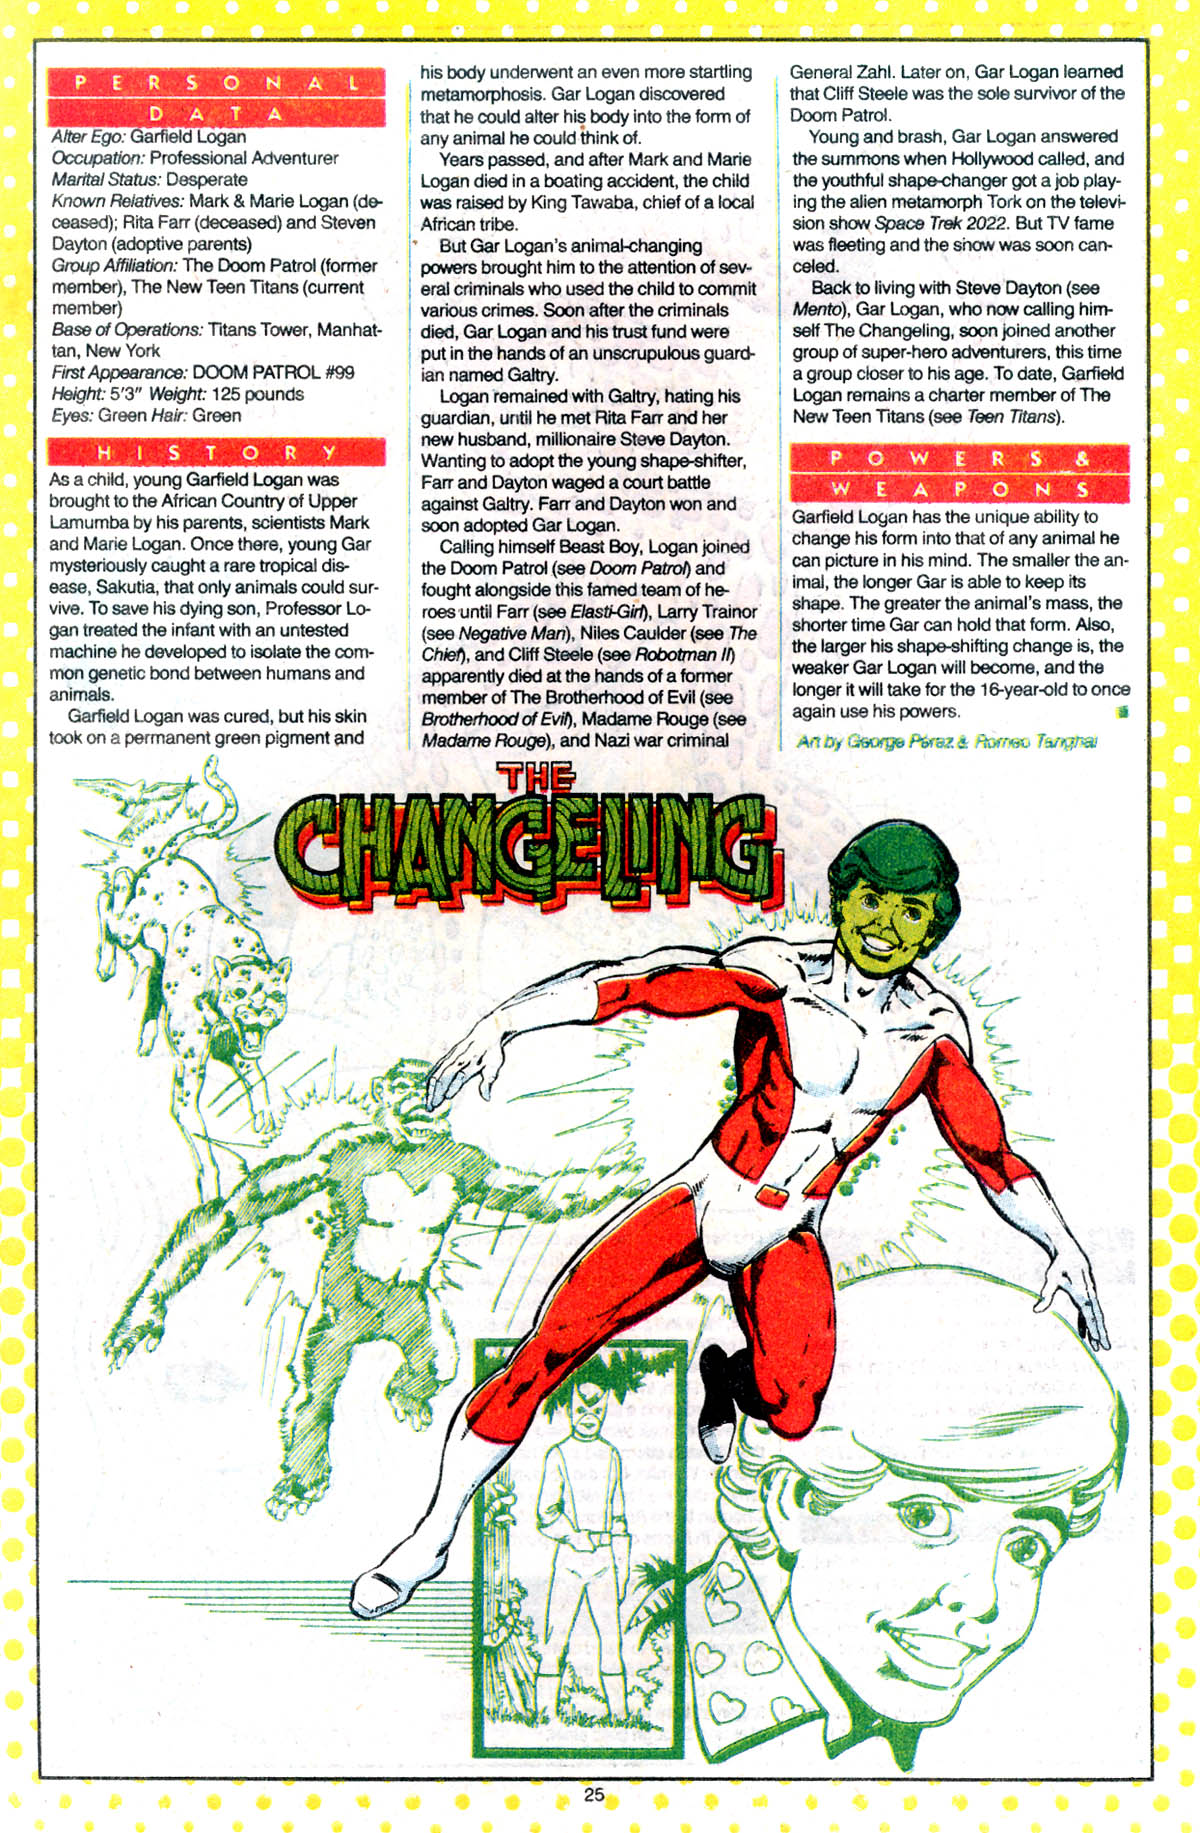 Changeling by George Perez & Romeo Tanghal - Who's Who: The Definitive Directory of the DC Universe #4